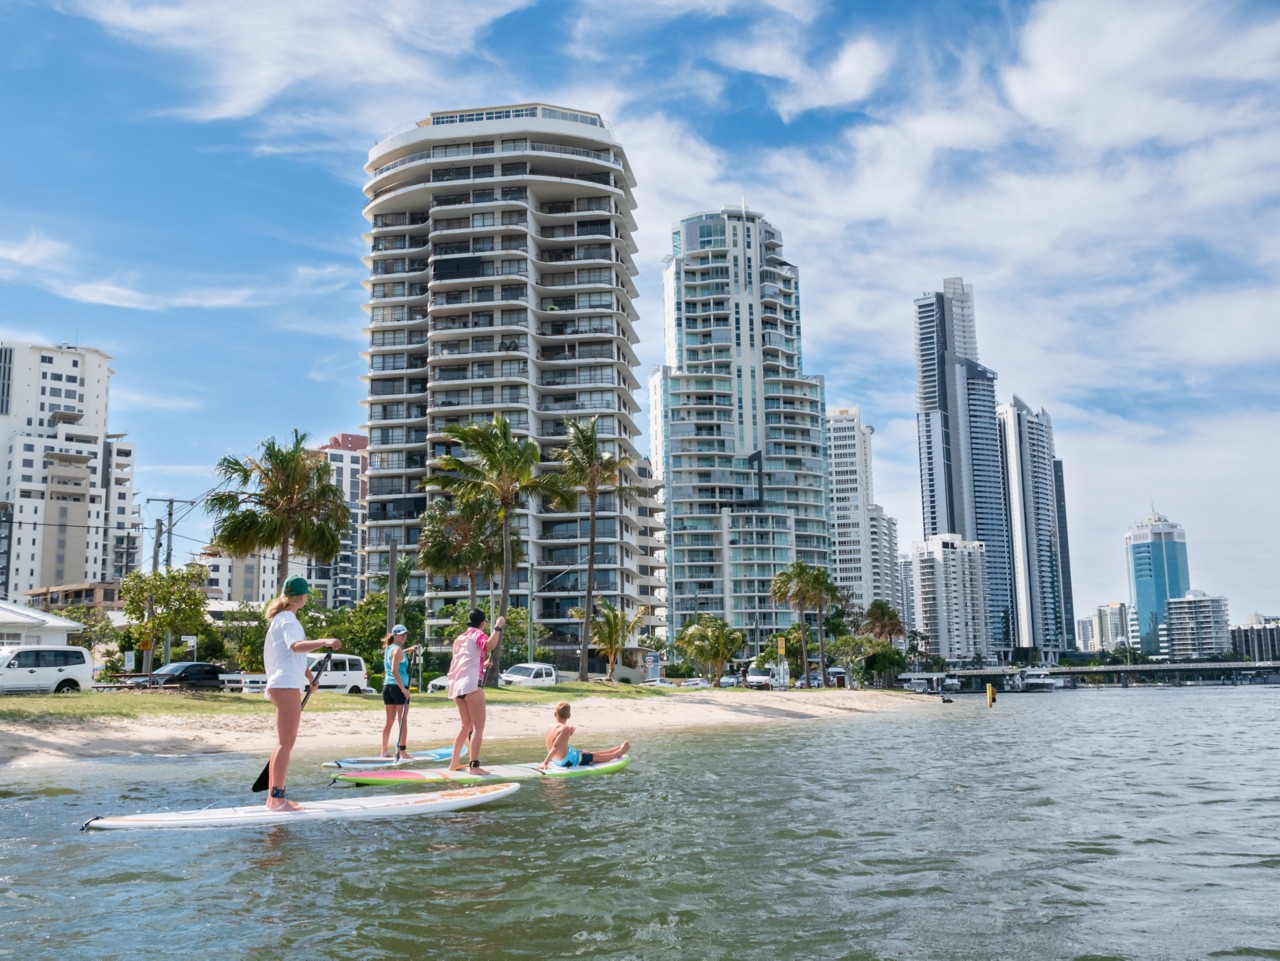 The BEST Surfers Paradise Tours and Things to Do in 2023 - FREE